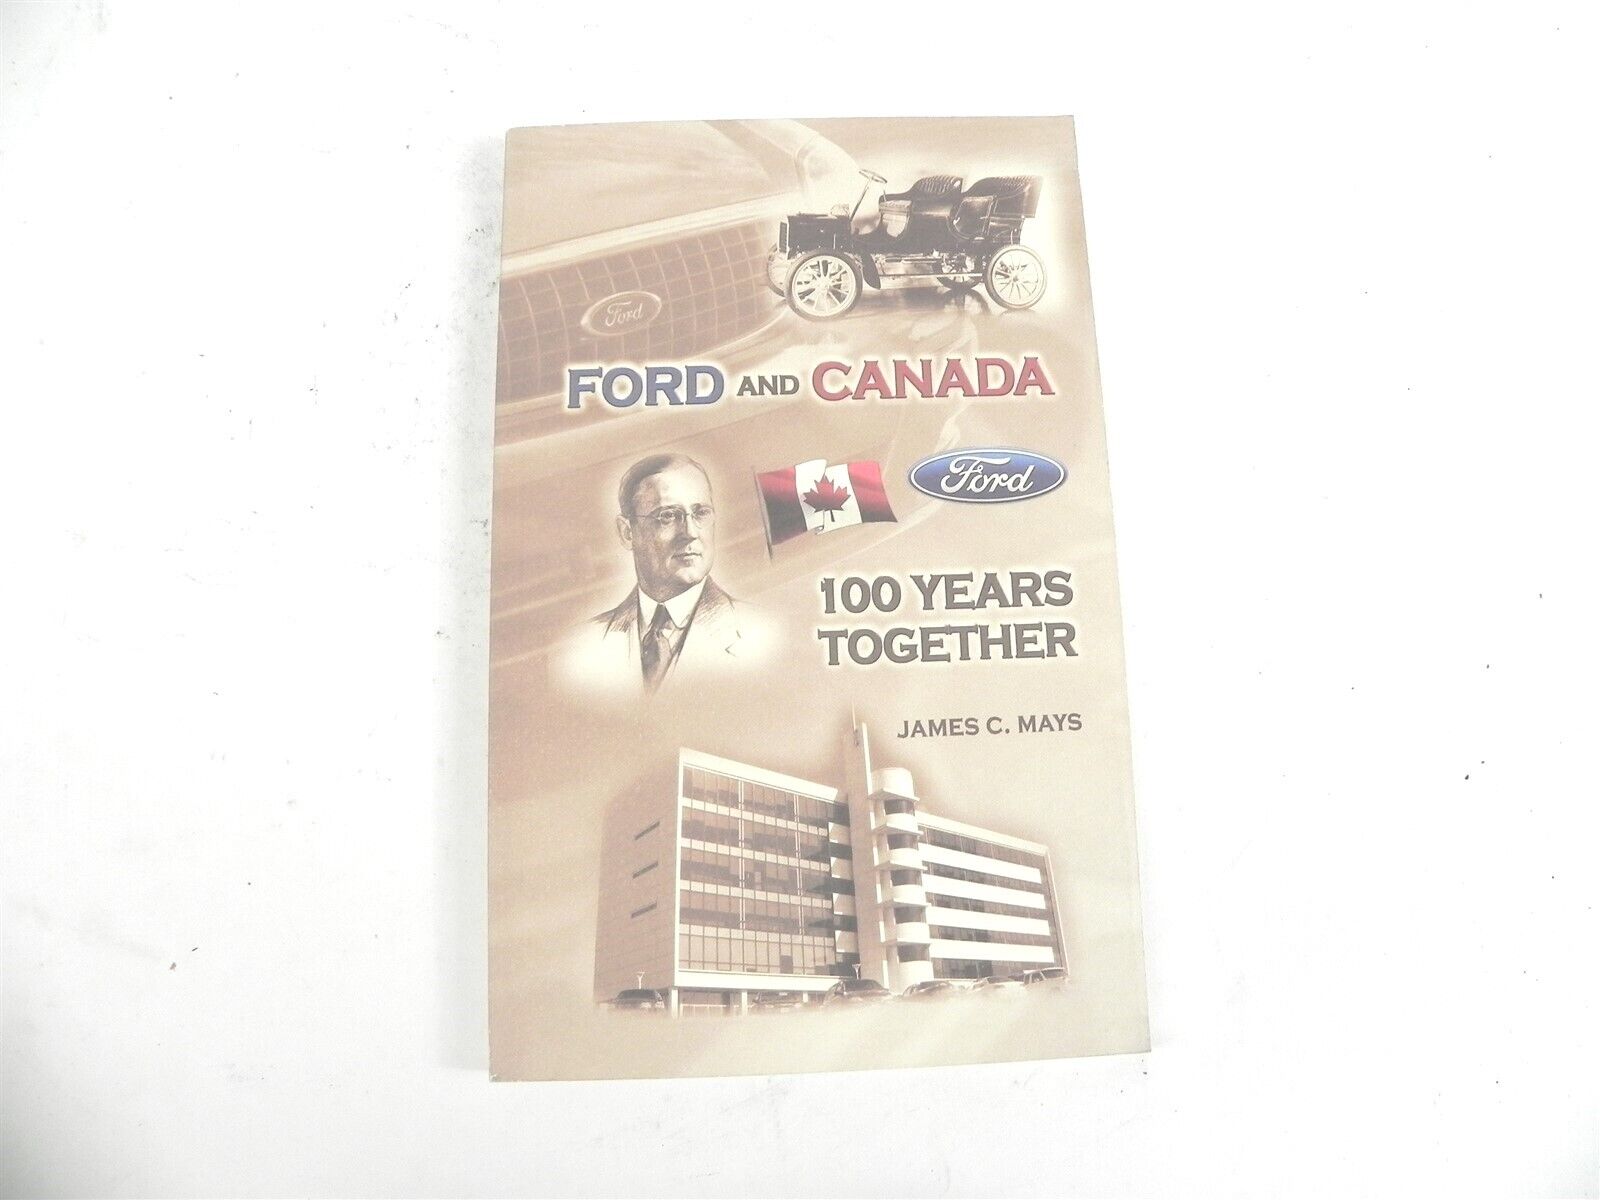 VINTAGE 2003 FORD AND CANADA 100 YEARS TOGETHER BY JAMES C MAYS HISTORY OF FORD